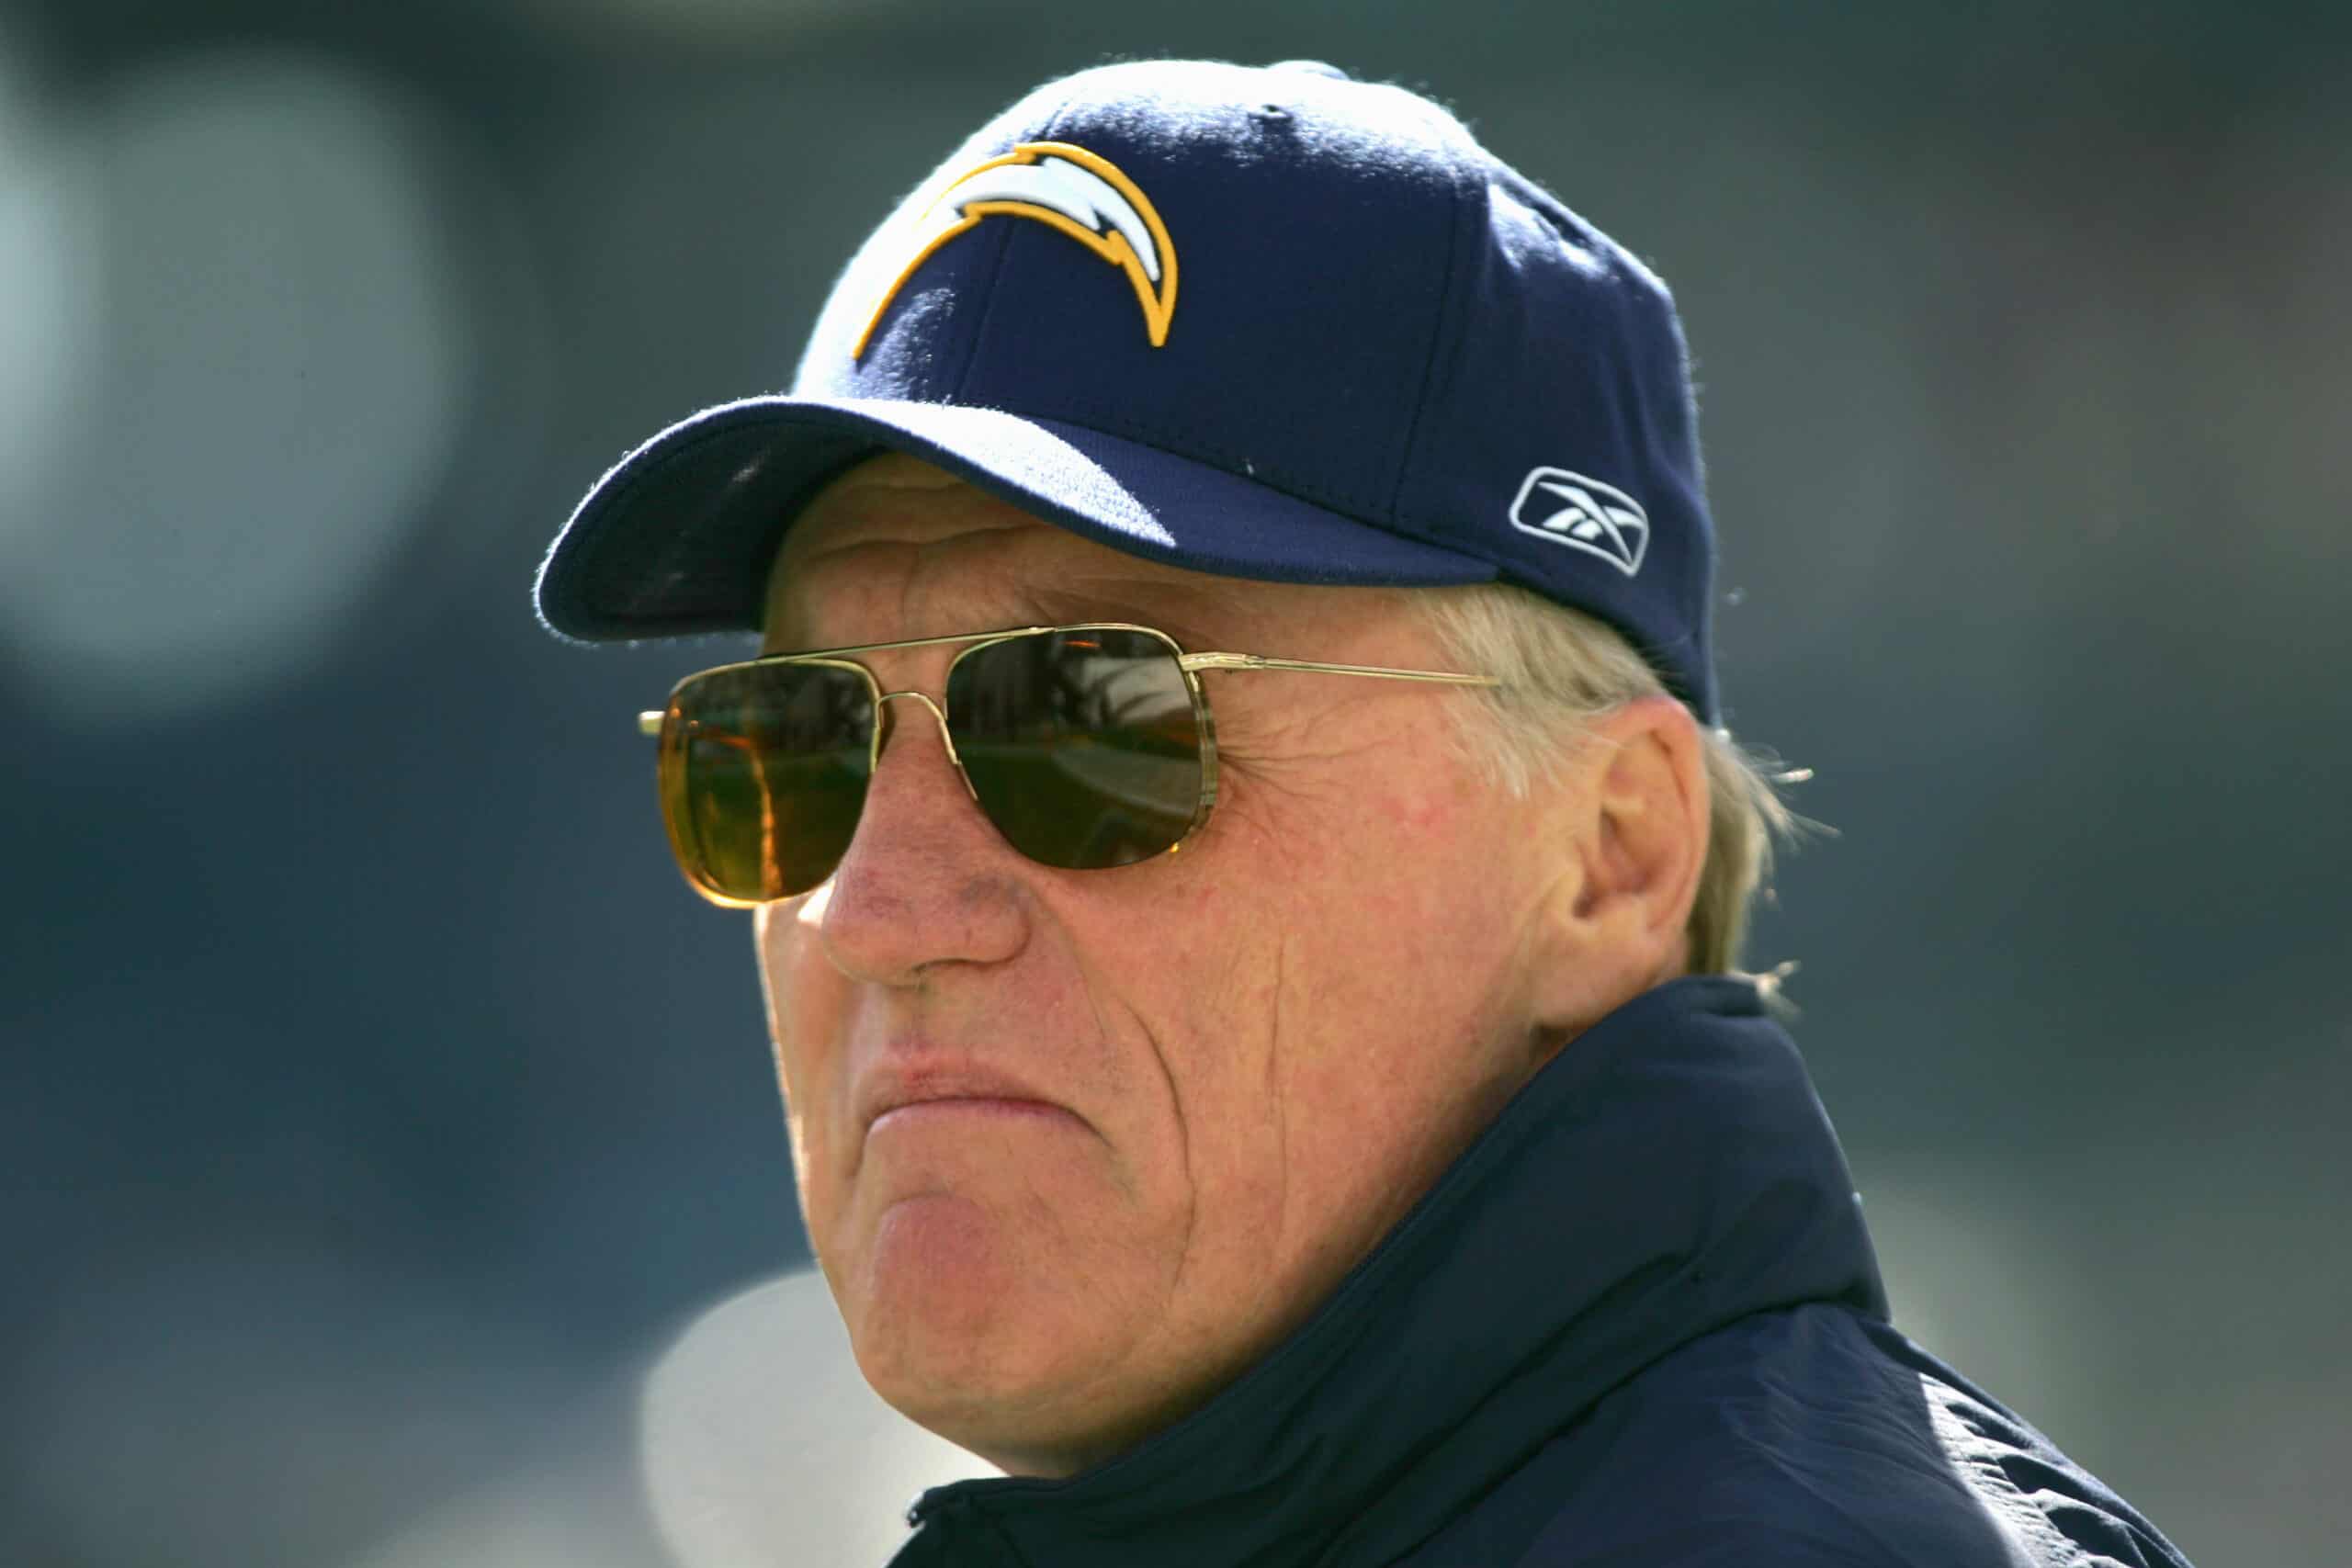 Head coach Marty Schottenheimer of the San Diego Chargers looks on during the game against the Philadelphia Eagles at Lincoln Financial Field on October 23, 2005 in Philadelphia, Pennsylvania. The Eagles defeated the Chargers 20-17.